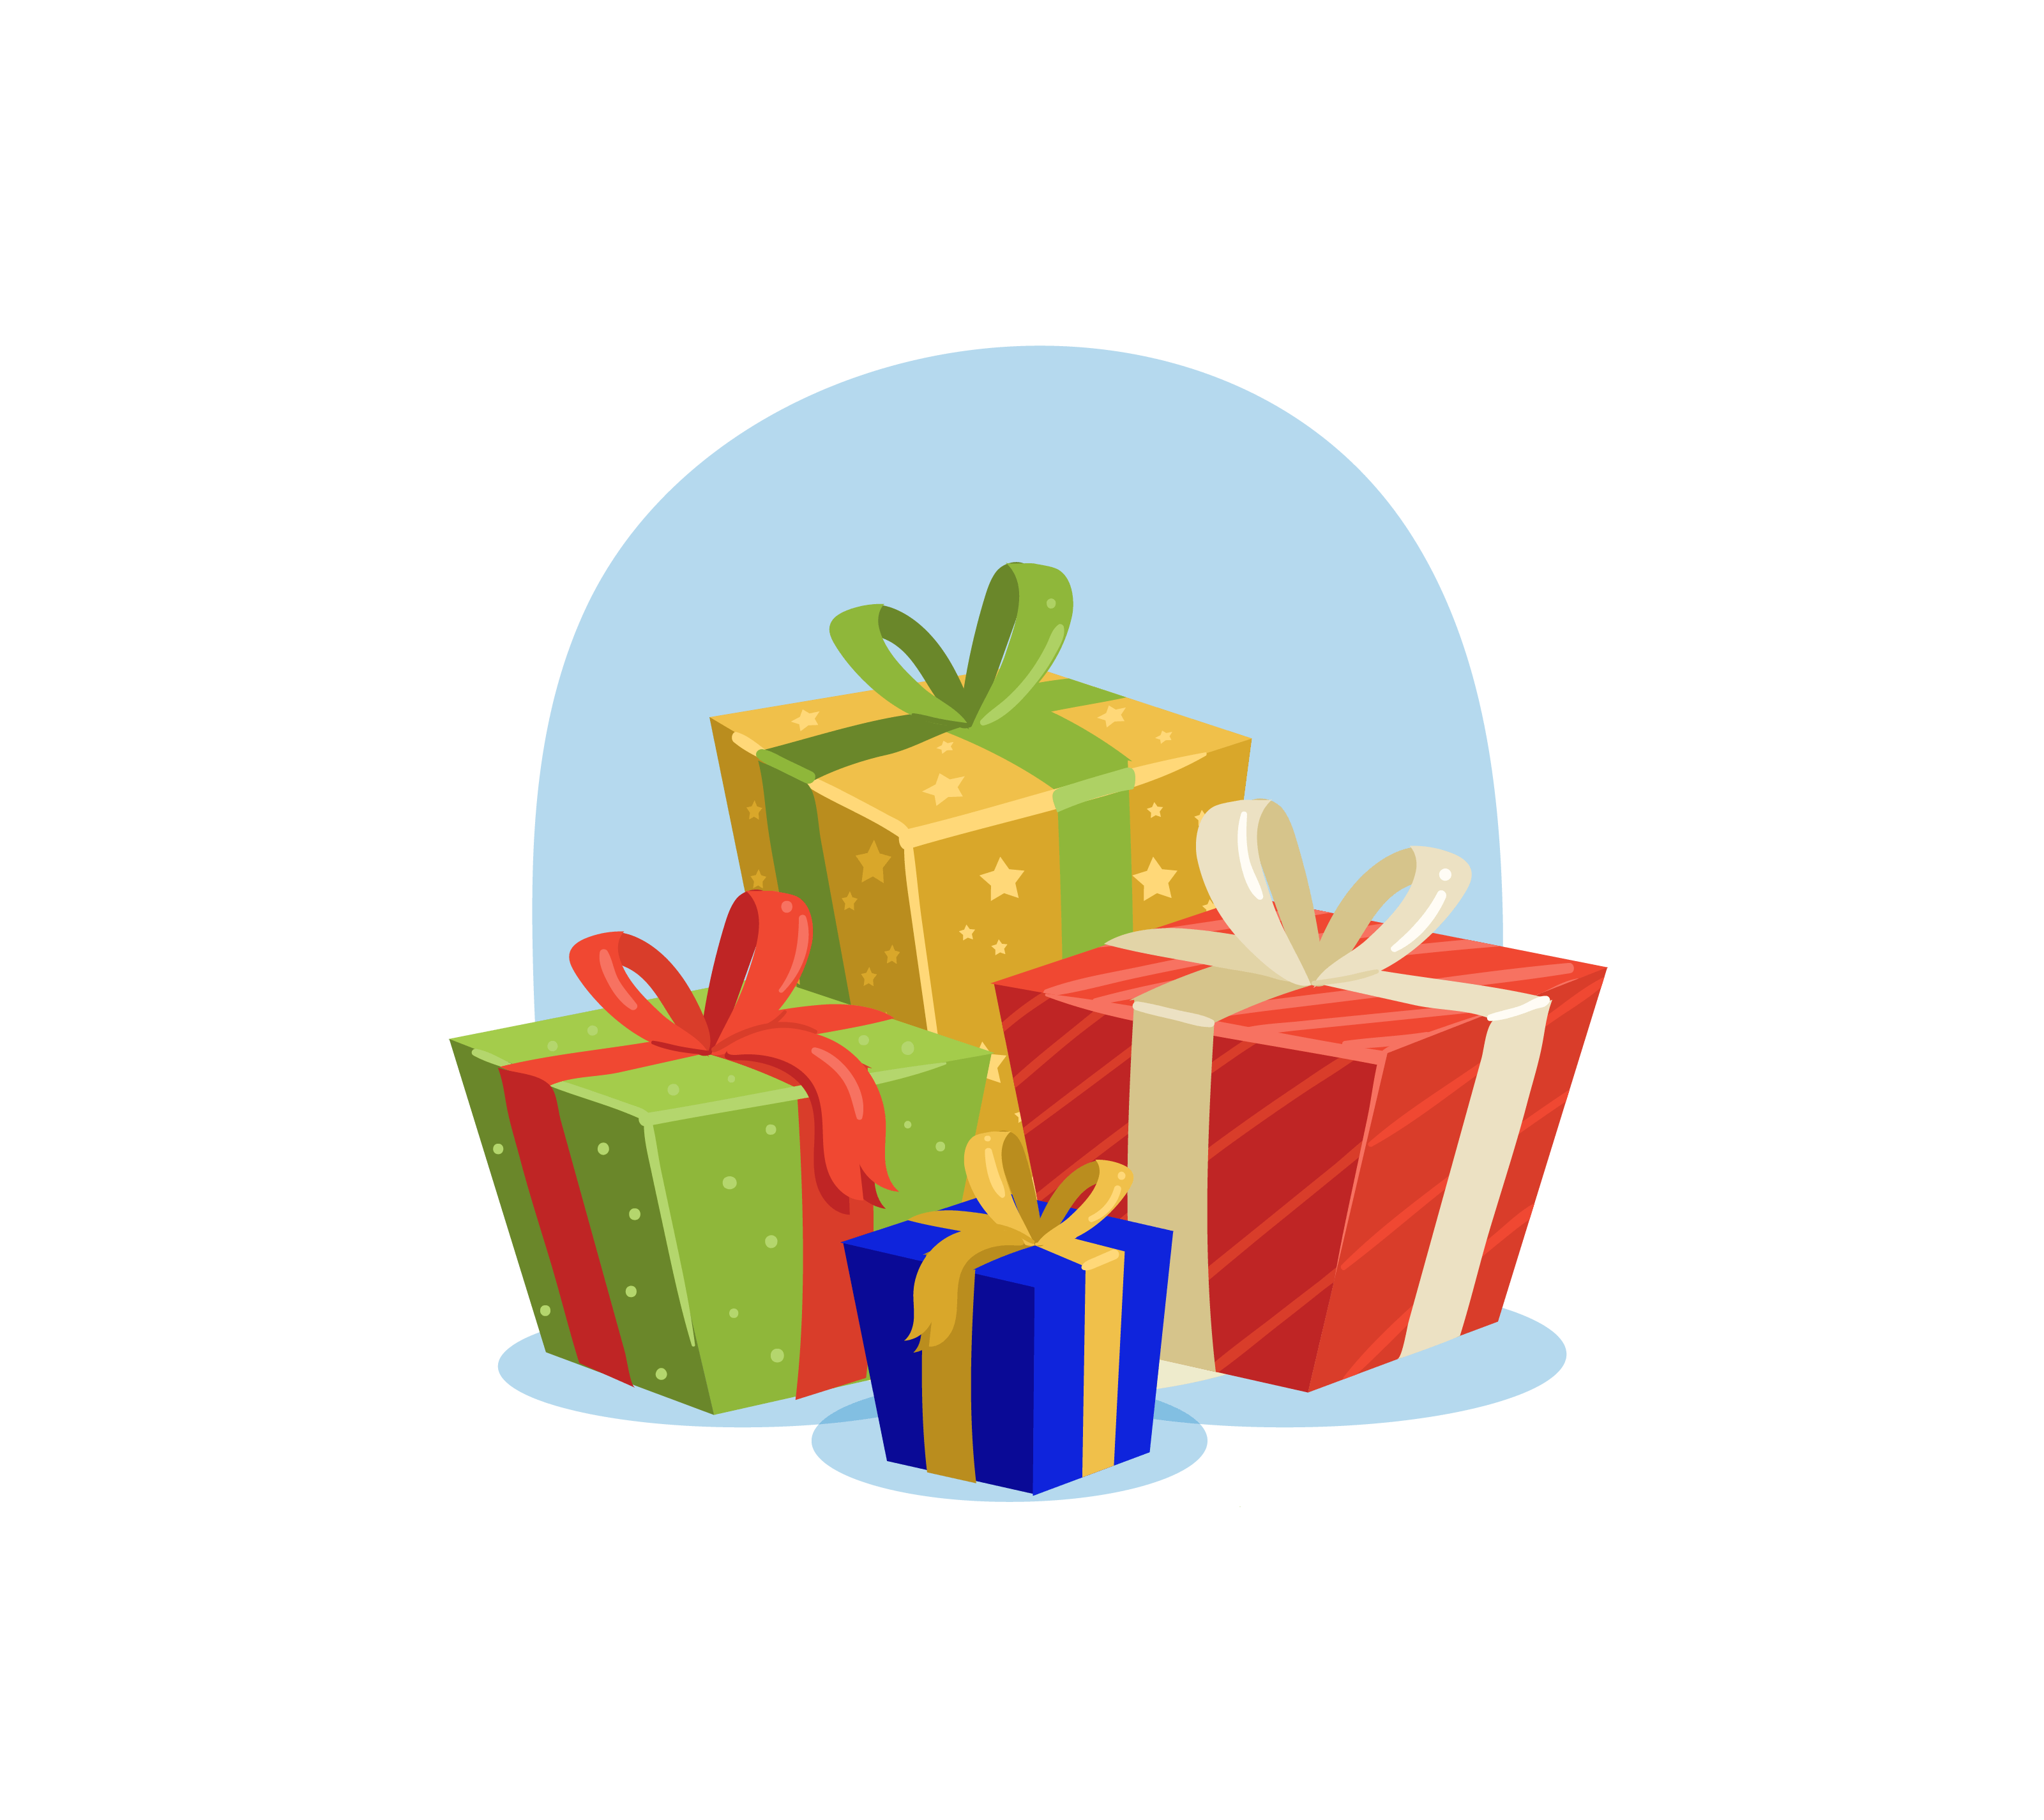 Illustration of wrapped gifts